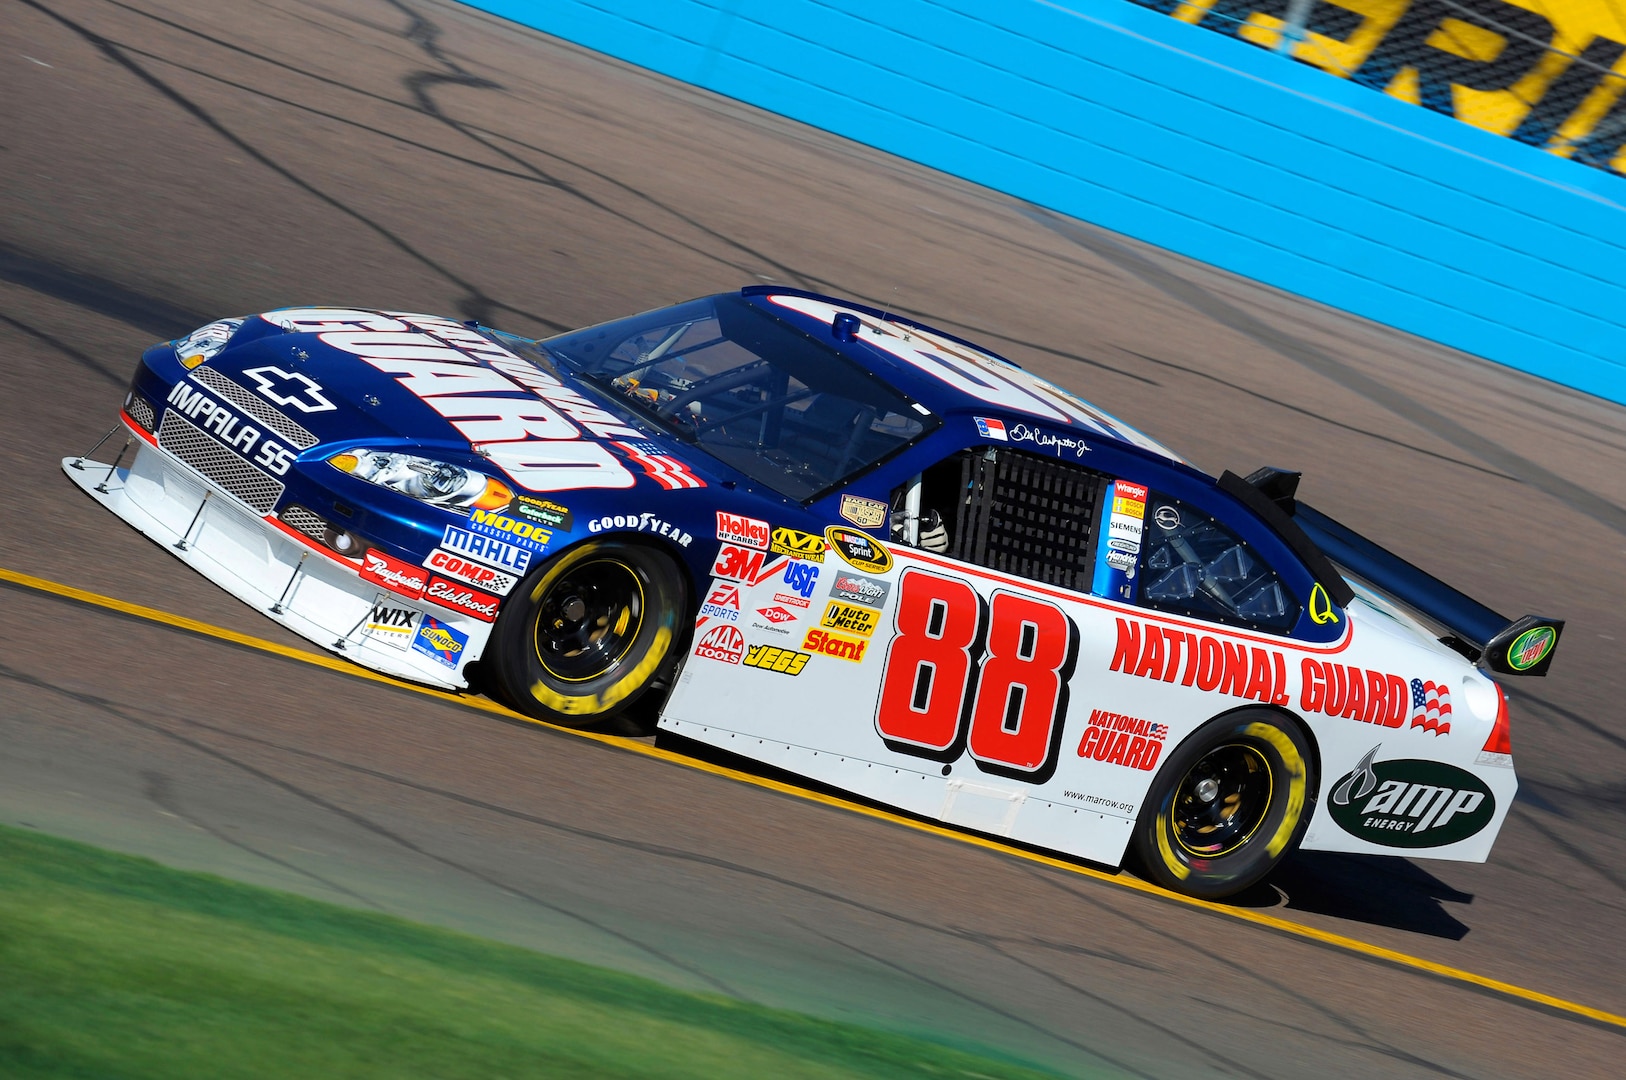 Dale Earnhardt Jr., driver of the No. 88 AMP Energy/National Guard Chevrolet, started the April 12 race at Phoenix International Raceway 13th and finished seventh. Earnhardt led 87 laps and ran 290 in the top 15.